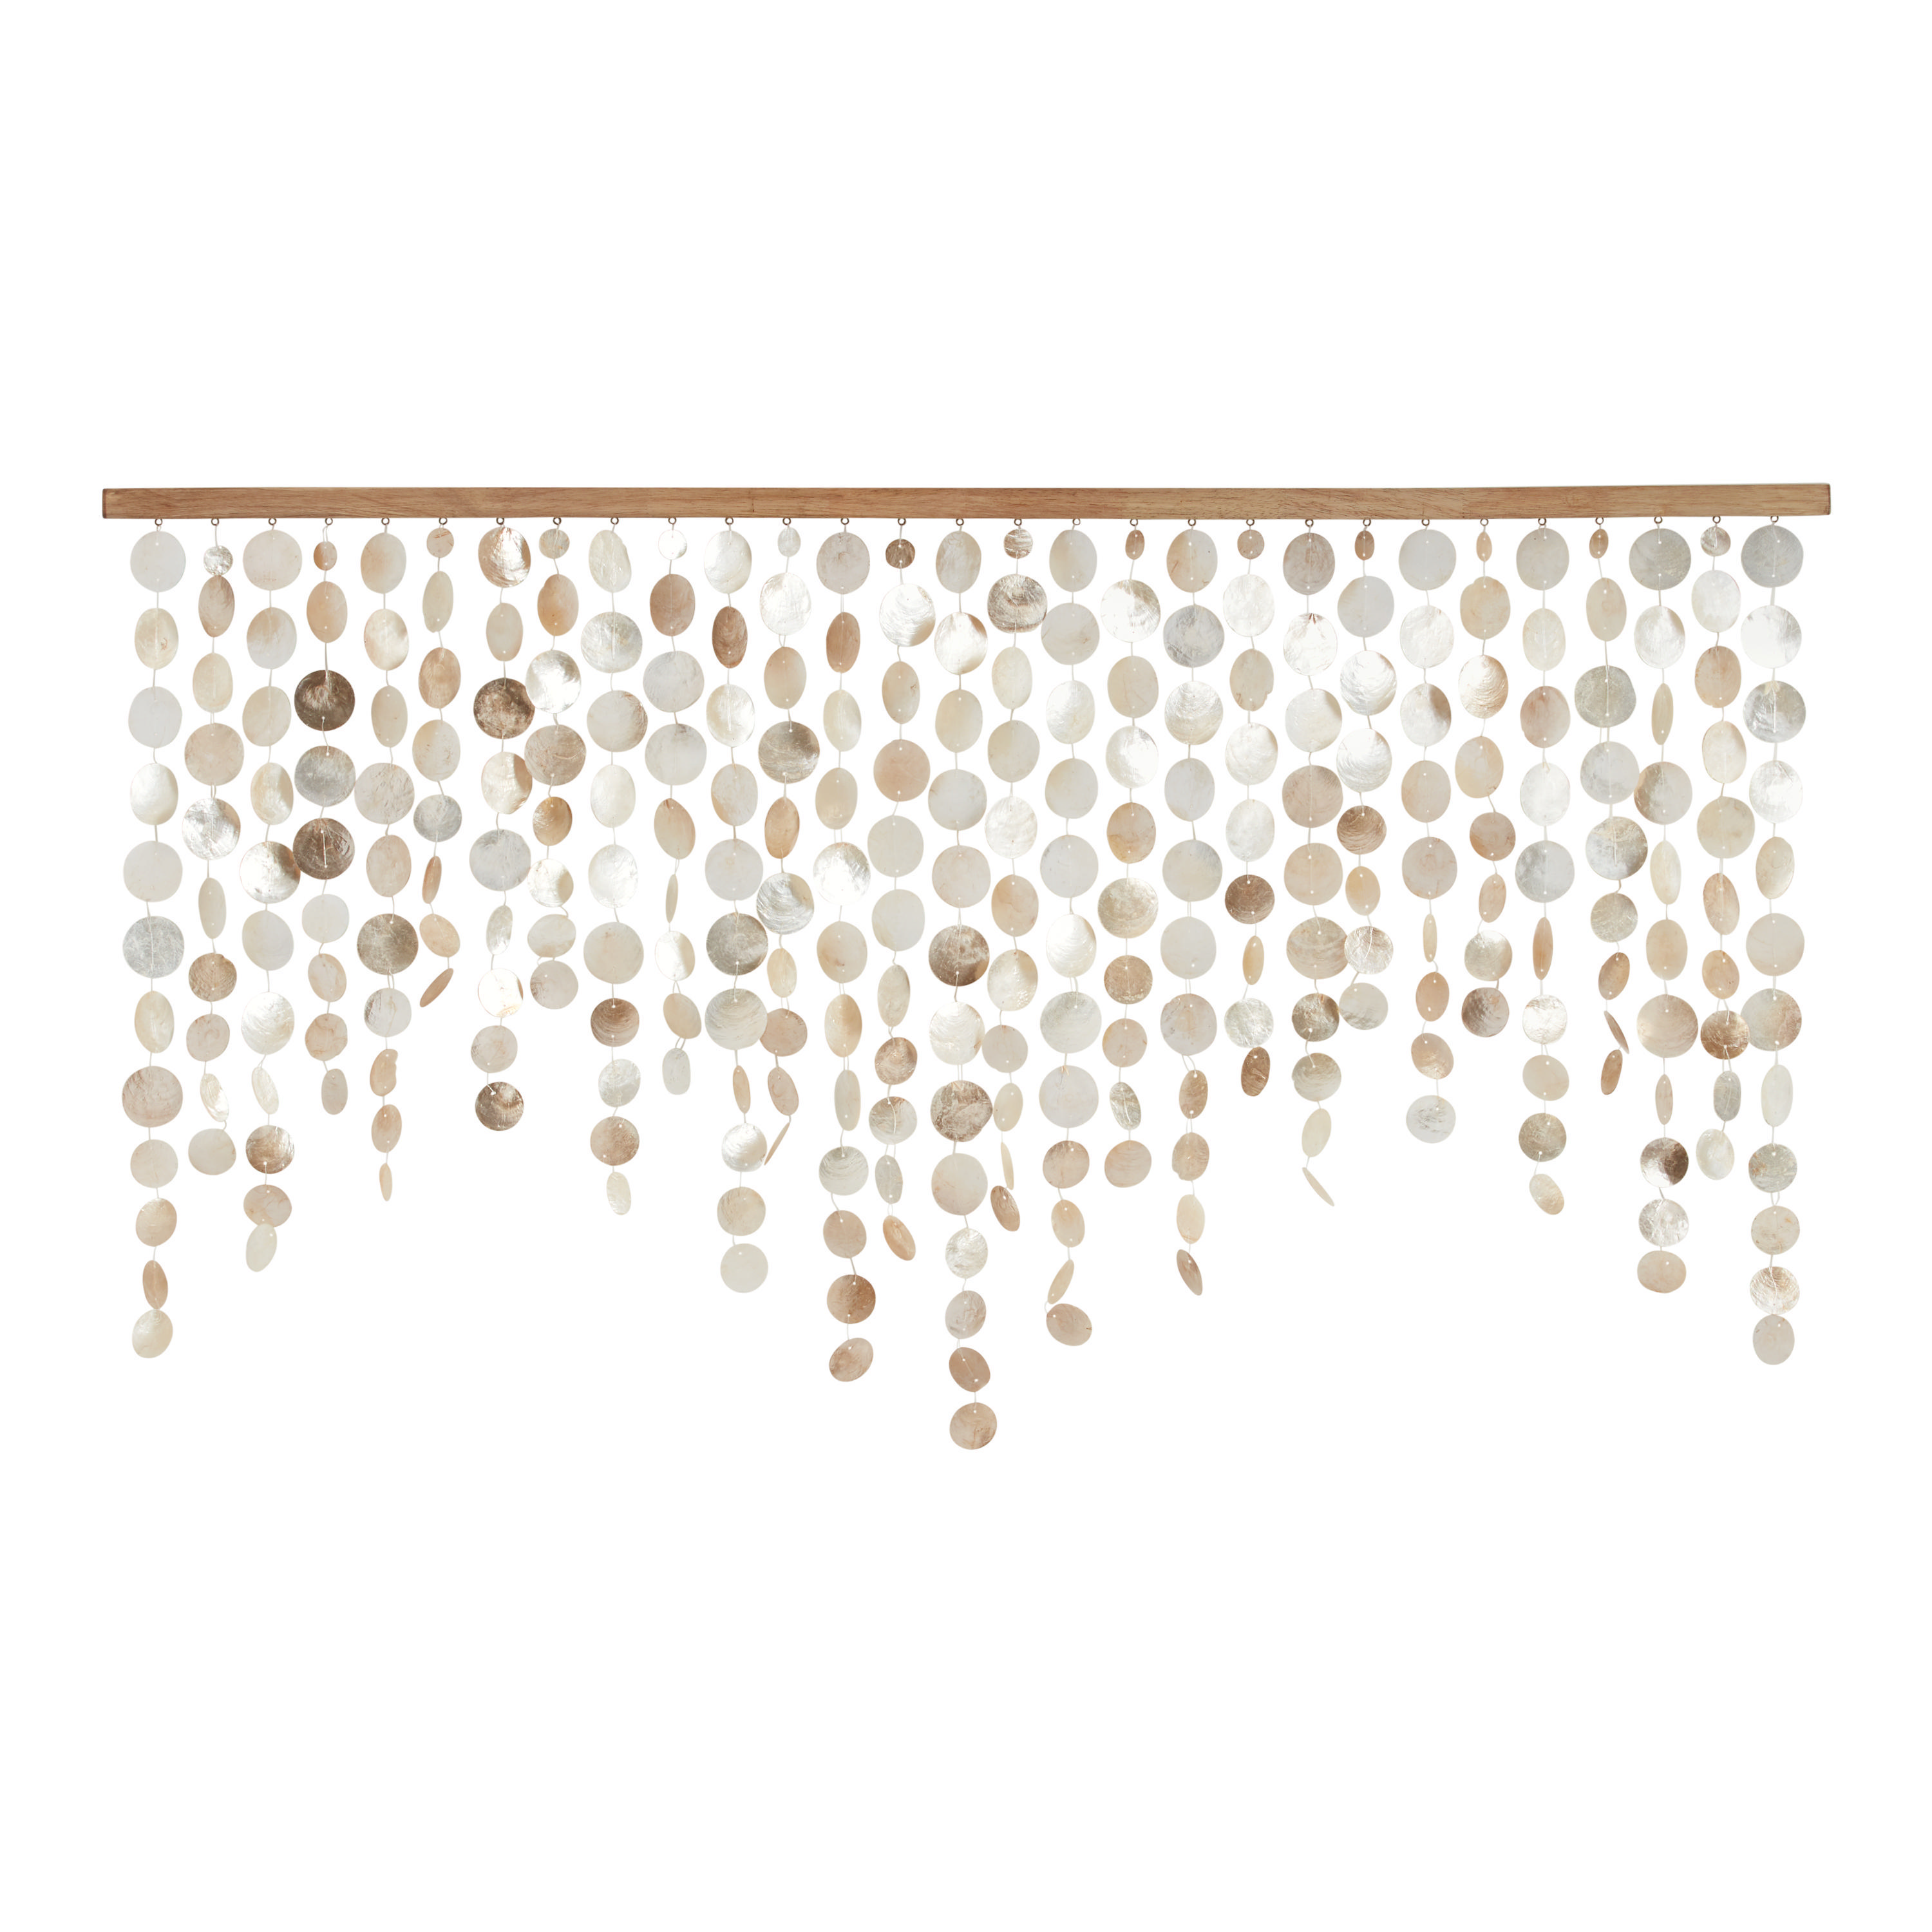 Champagne Capiz Shell And Natural Wood Wall Hanging - World Market